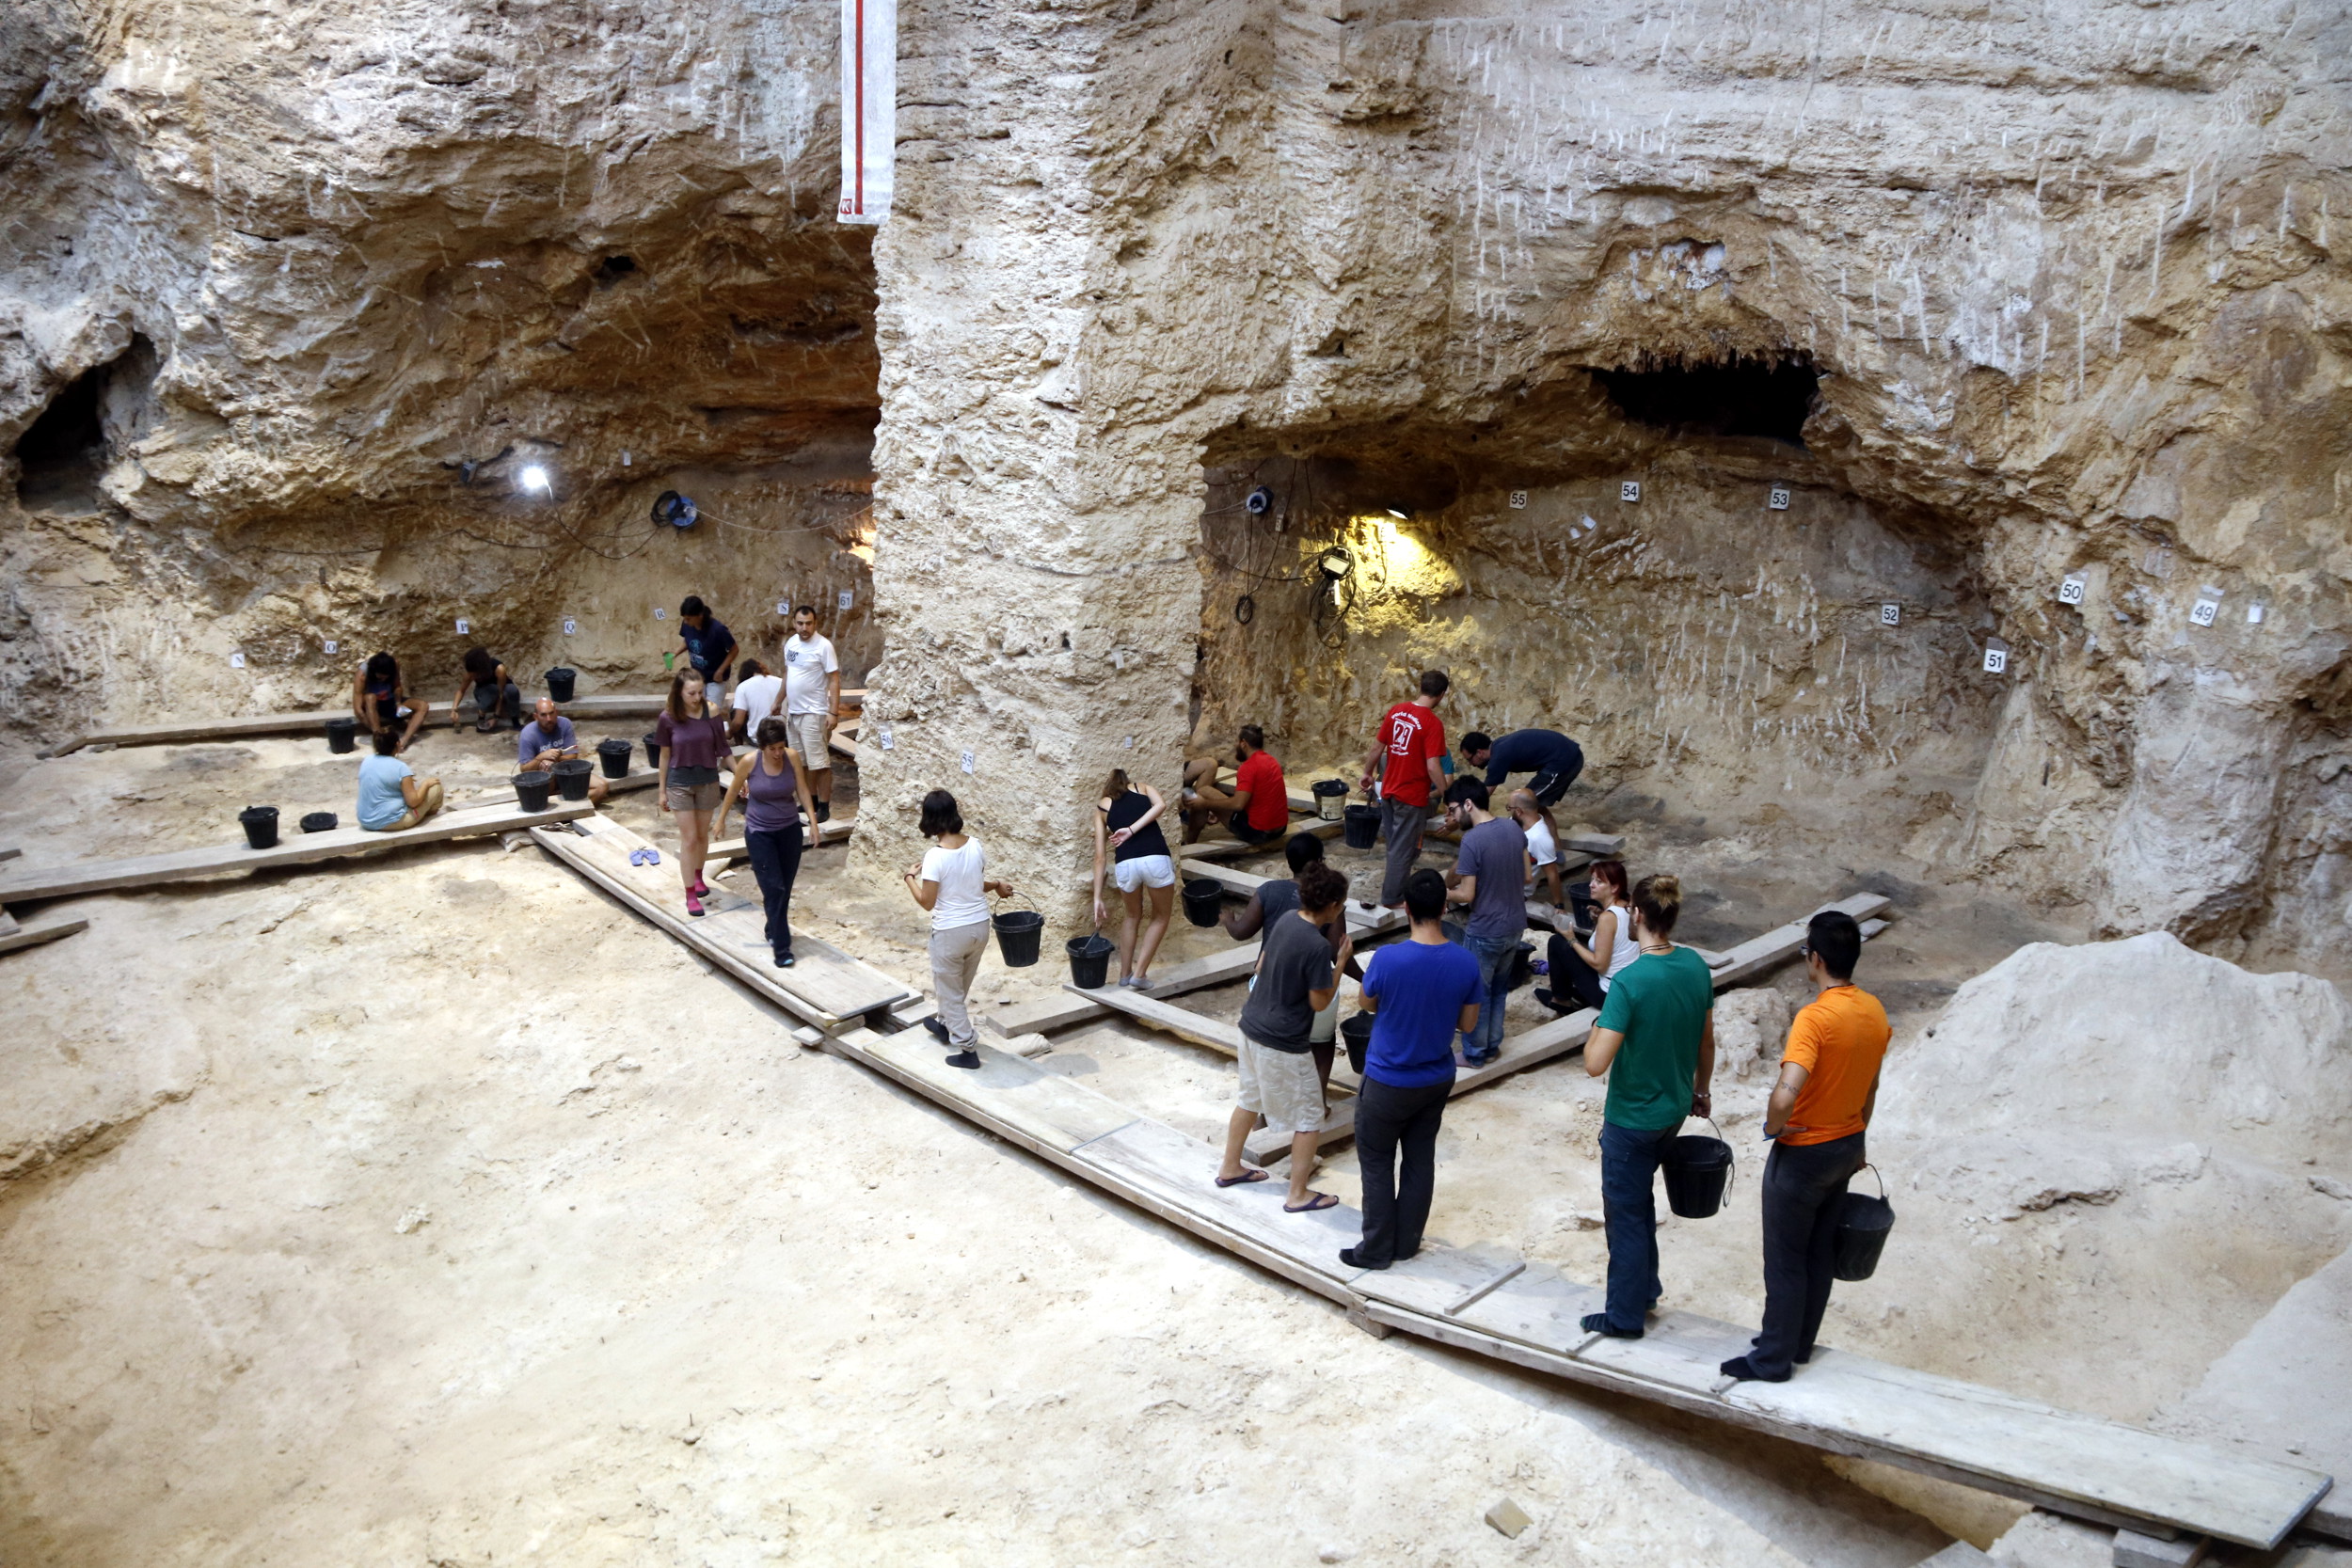 Archaeologists working to document Neanderthal life in Abric Romaní (by ACN)